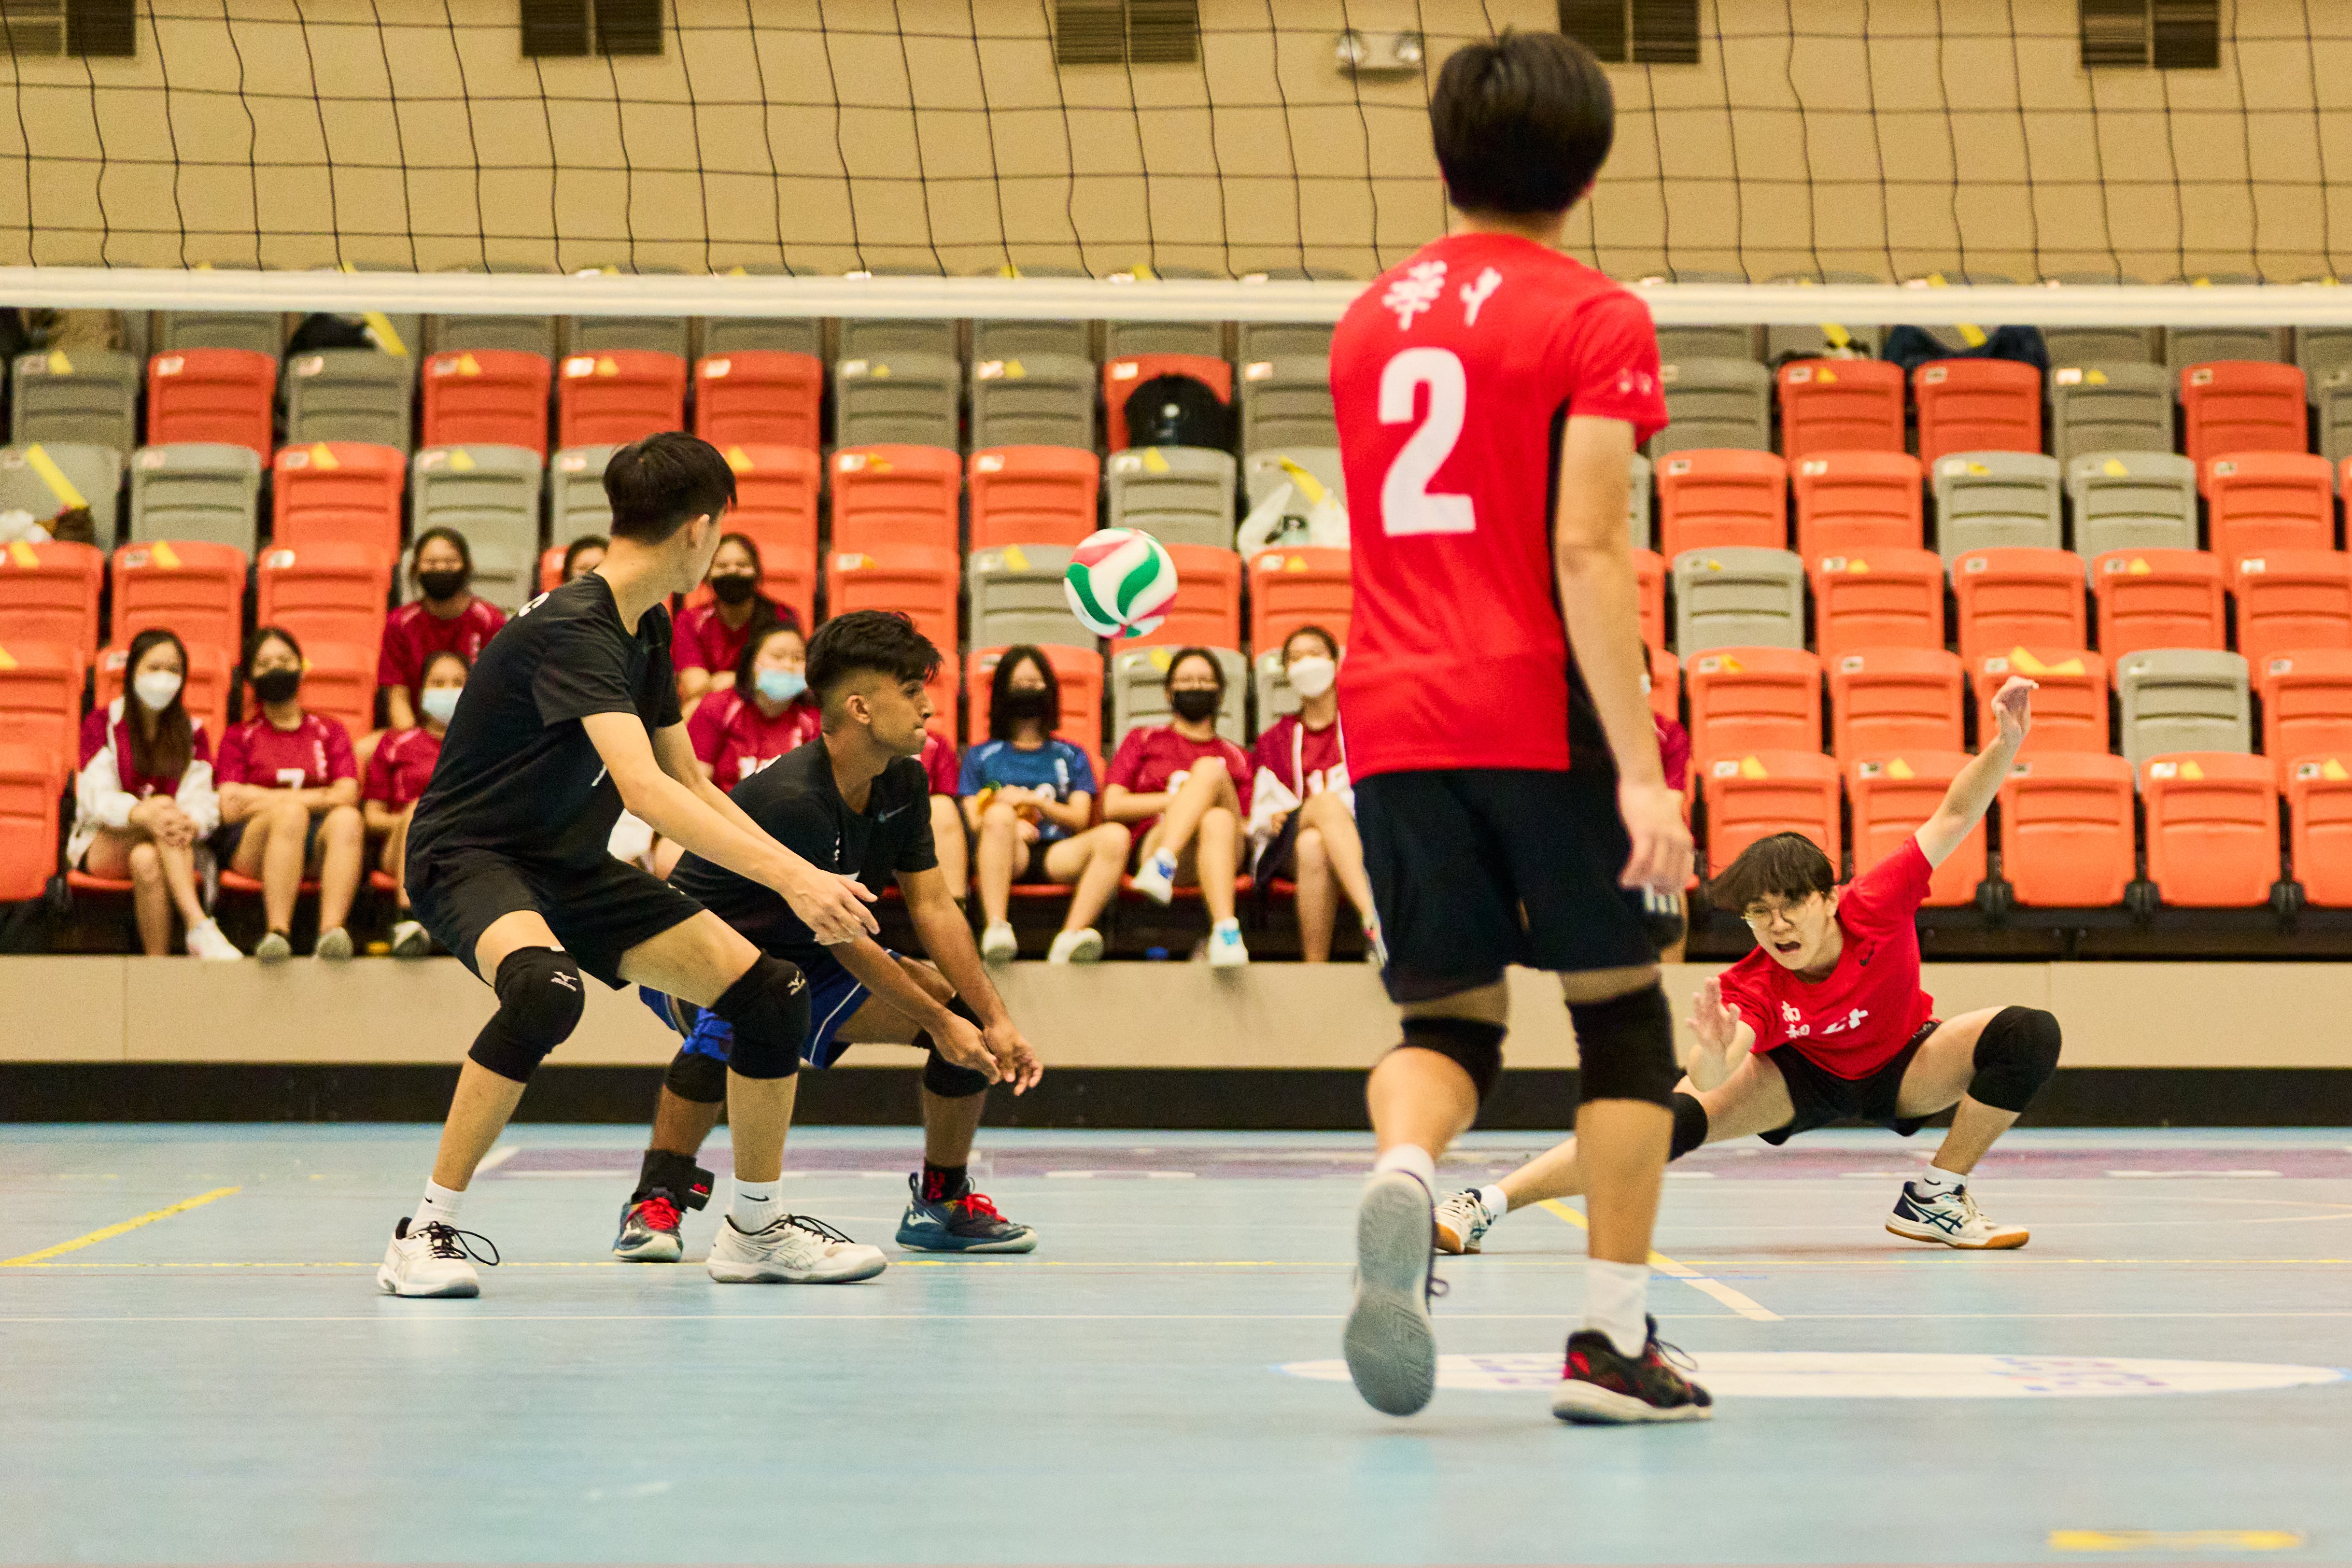 2022-05-23 15 Volleyball Final A Div Boys NYJC vs HCI, Kong Wen Kang(NYJC 4) right, unable to keep the ball in play Photo by Eric Koh DSC06075